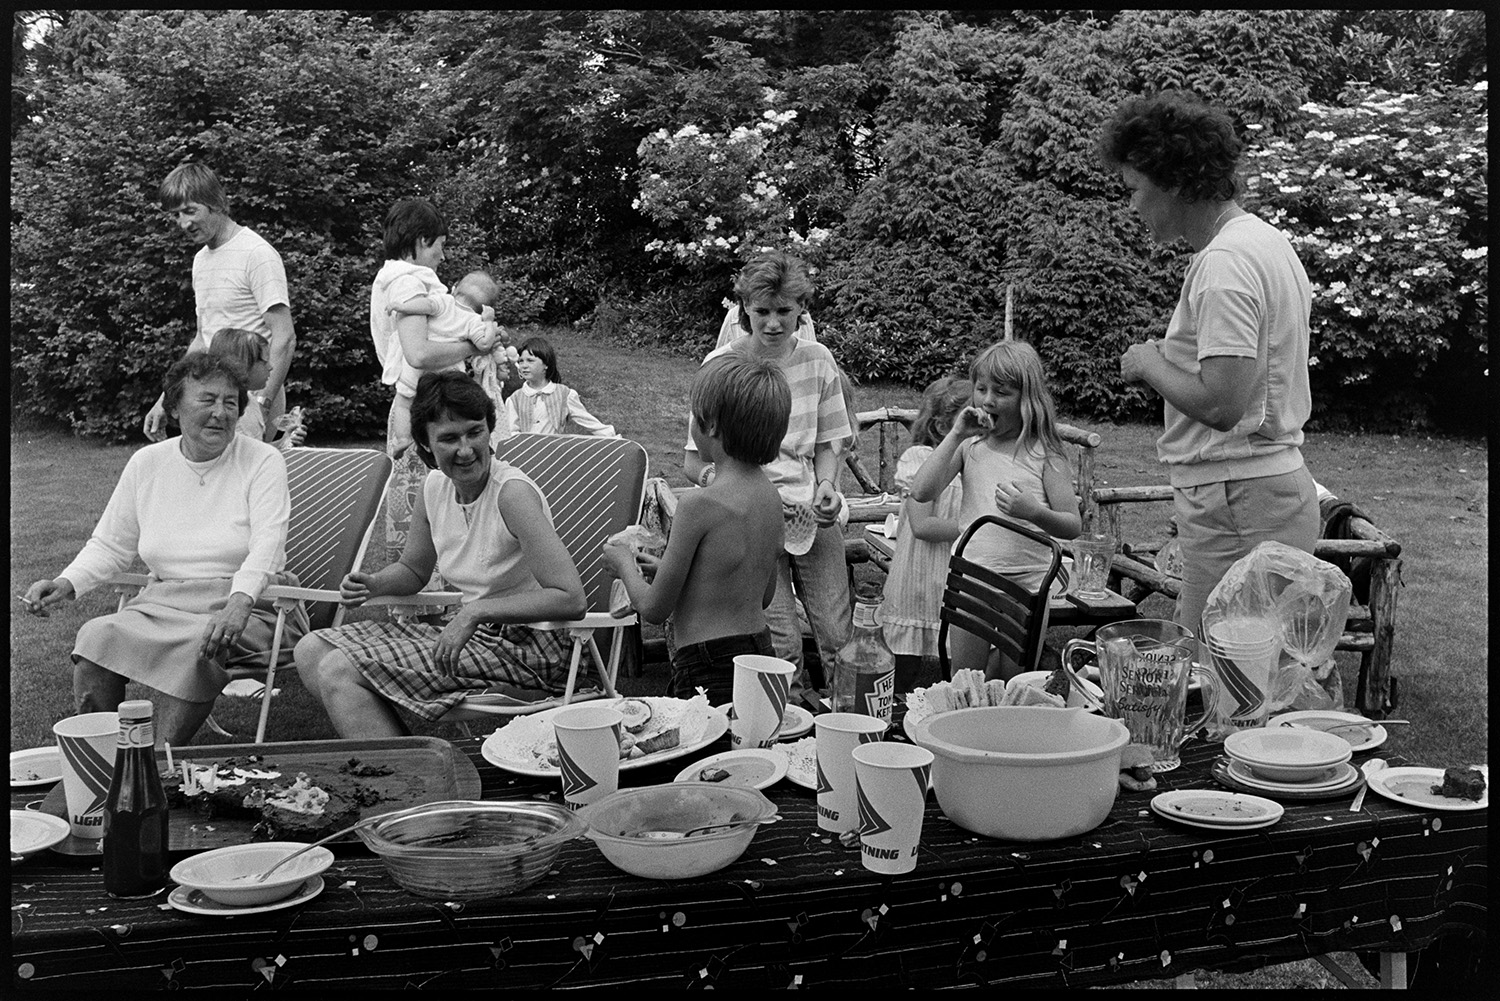 Barbeque in garden. 
[A man, women and children sat on garden chairs and benches, and eating barbequed food in the garden at Barlands, Dolton. A table laid with food and drinks can be seen in the foreground.]